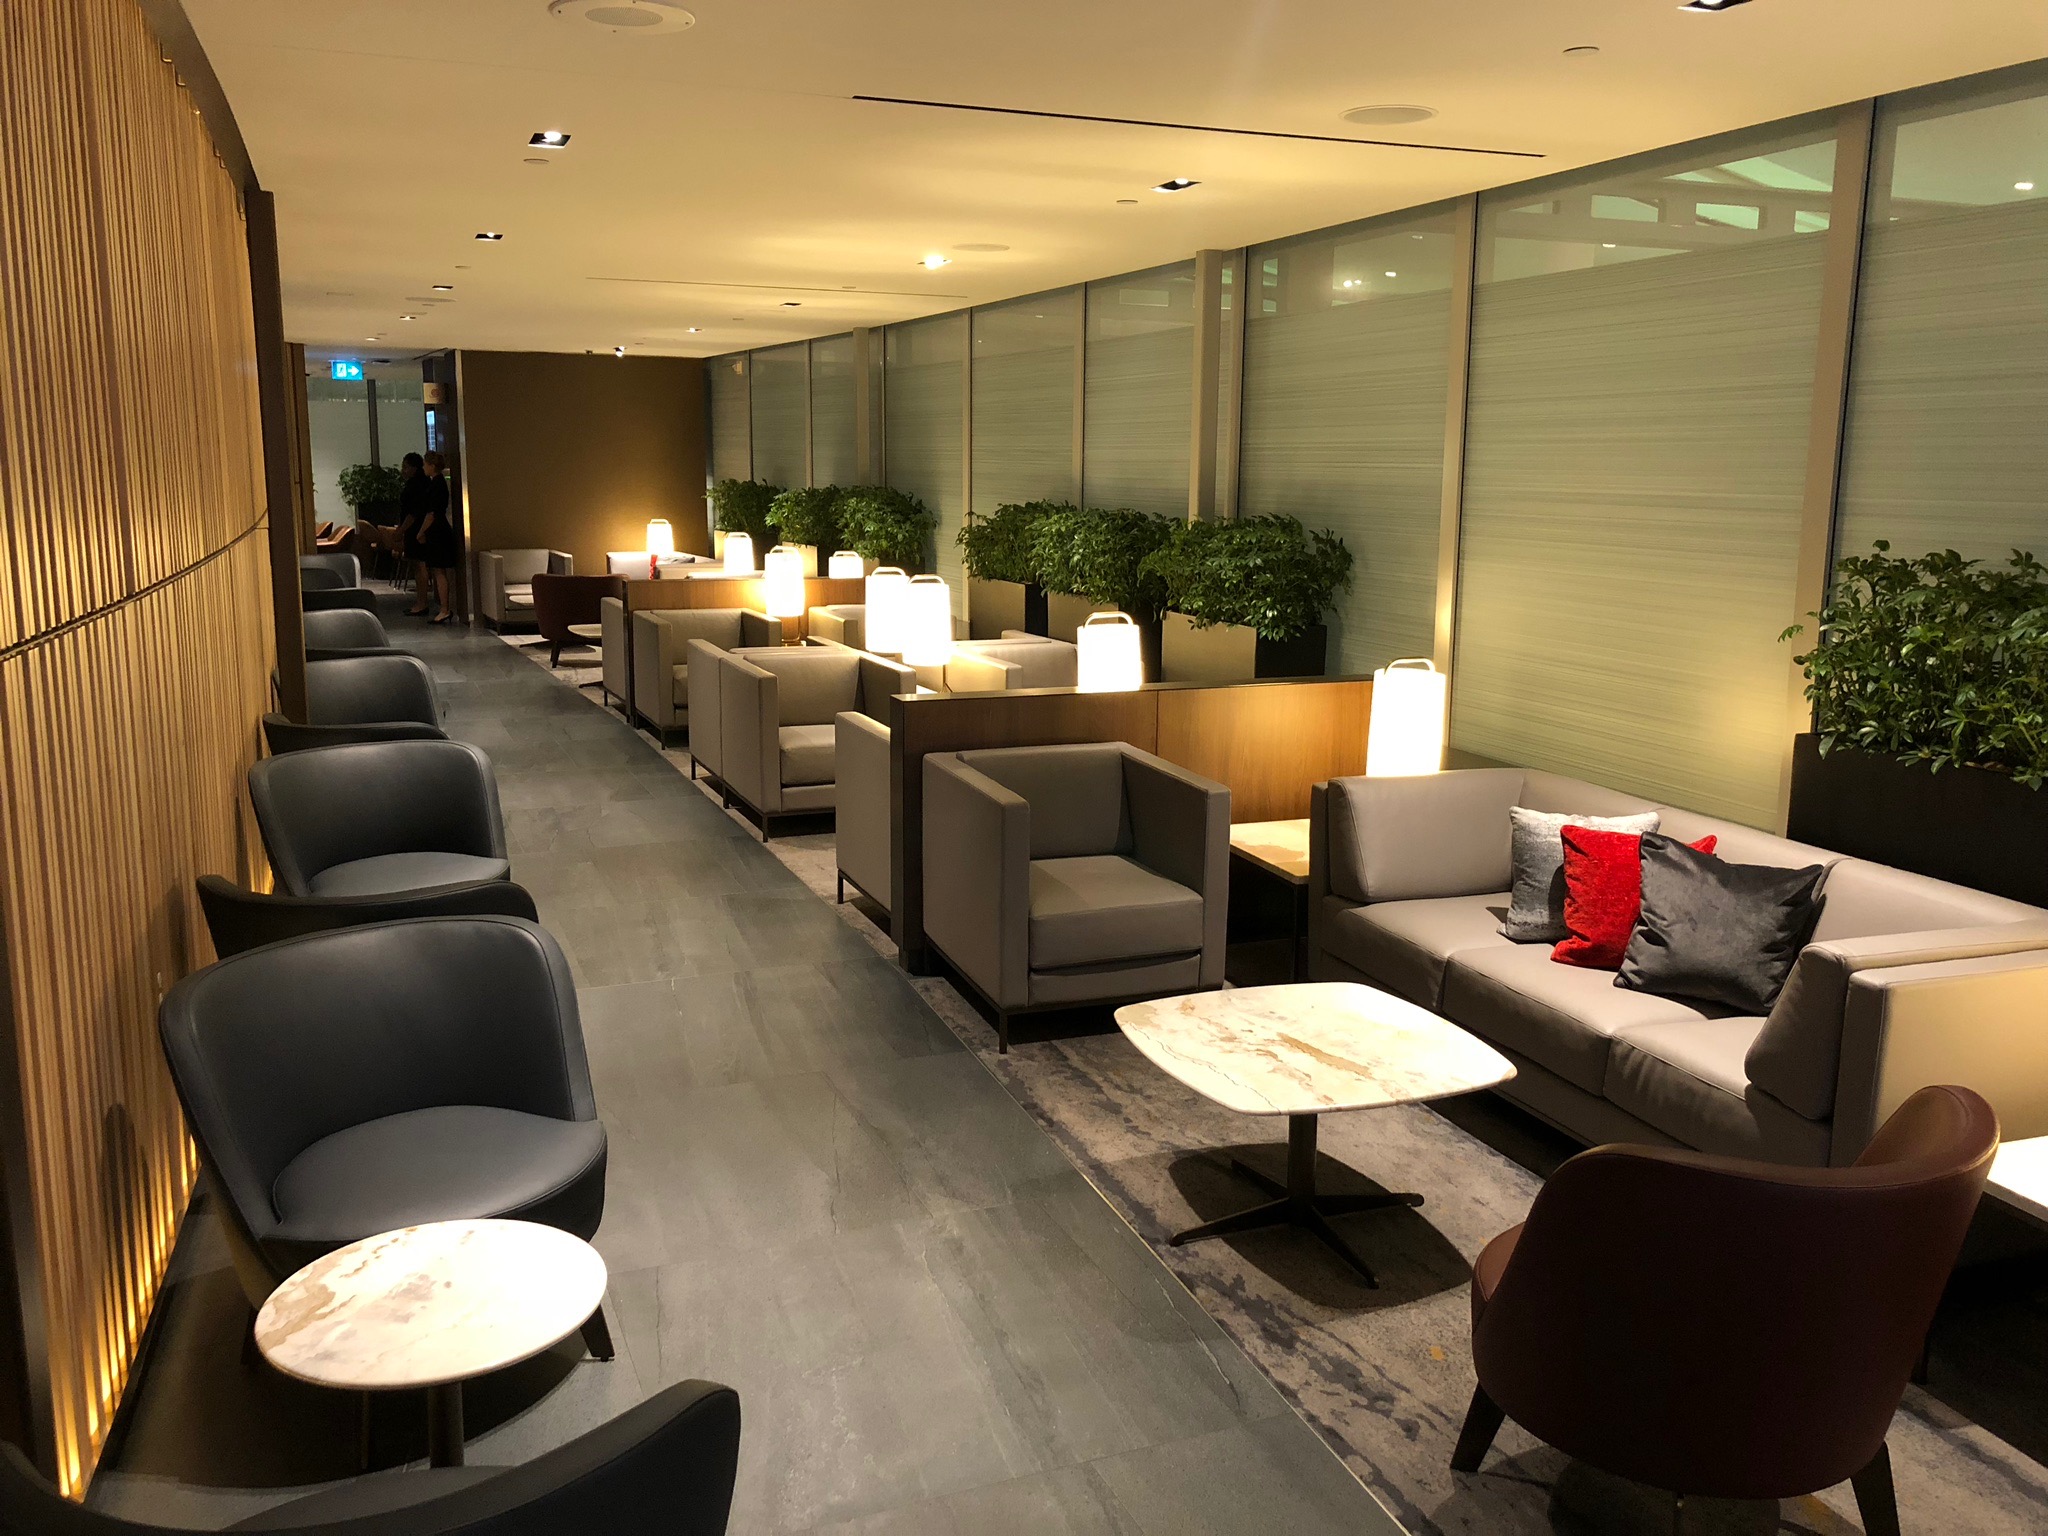 Air Canada Opened A Stunning New Bell Centre Lounge But It's Not For Poors,  Sorry (PHOTOS) - MTL Blog